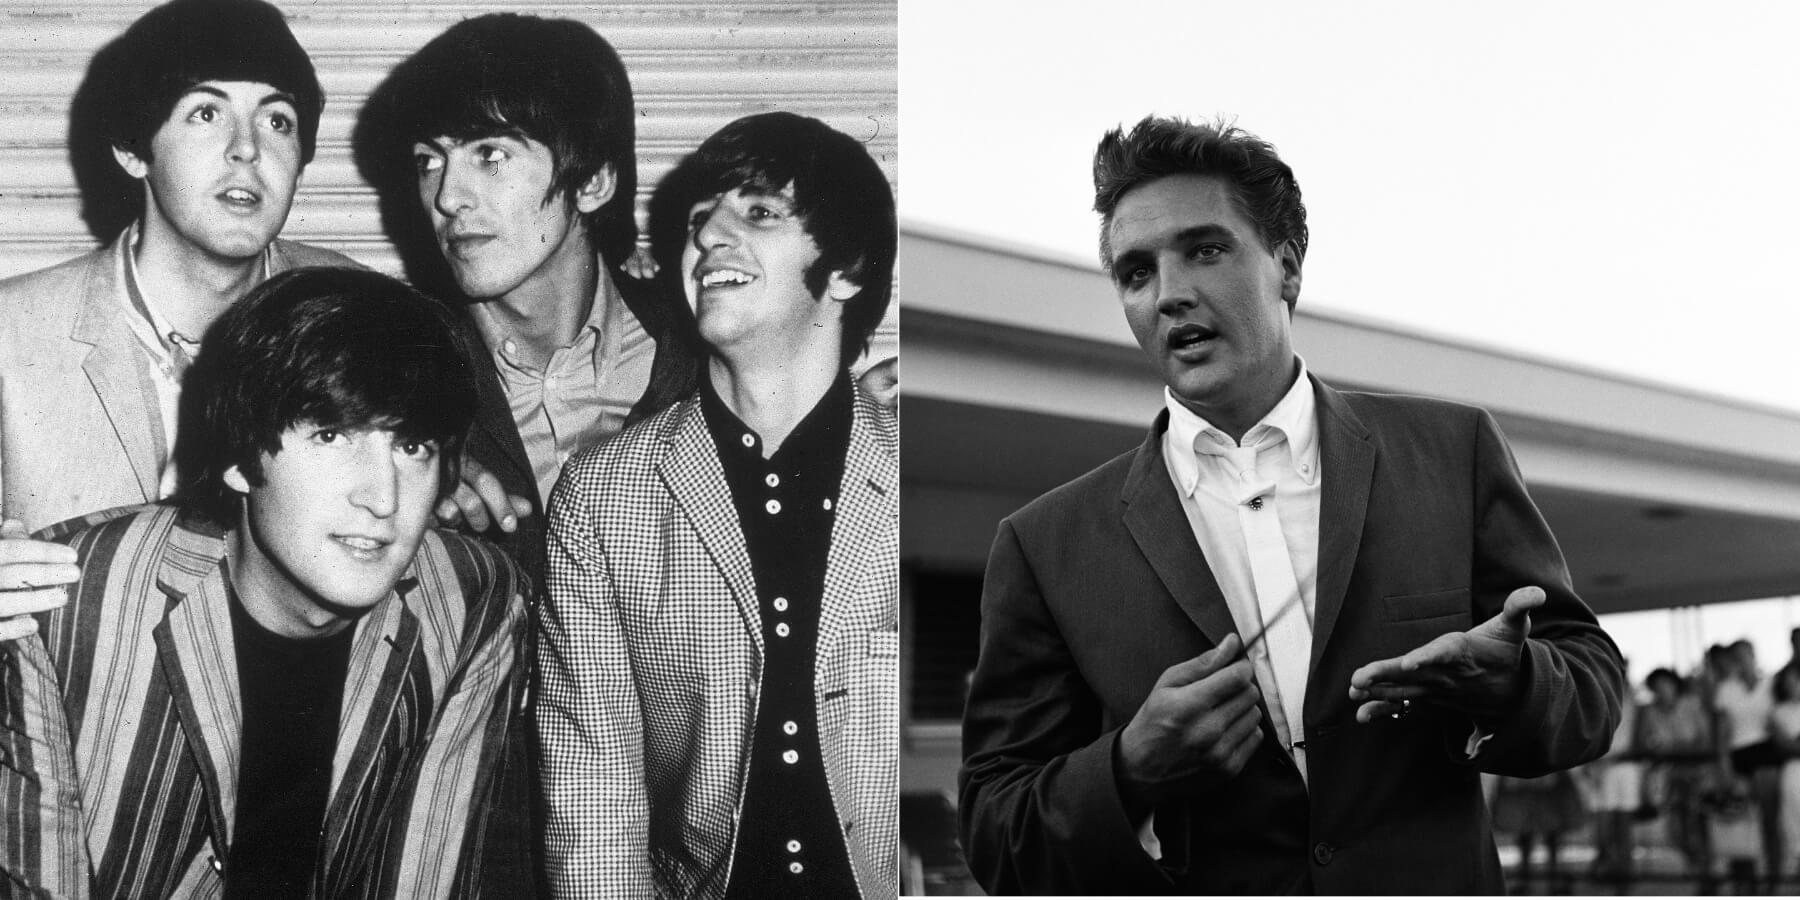 The Beatles pose while in Los Angeles, California, circa 1965 and Elvis Presley is photographed in Florida that same year.